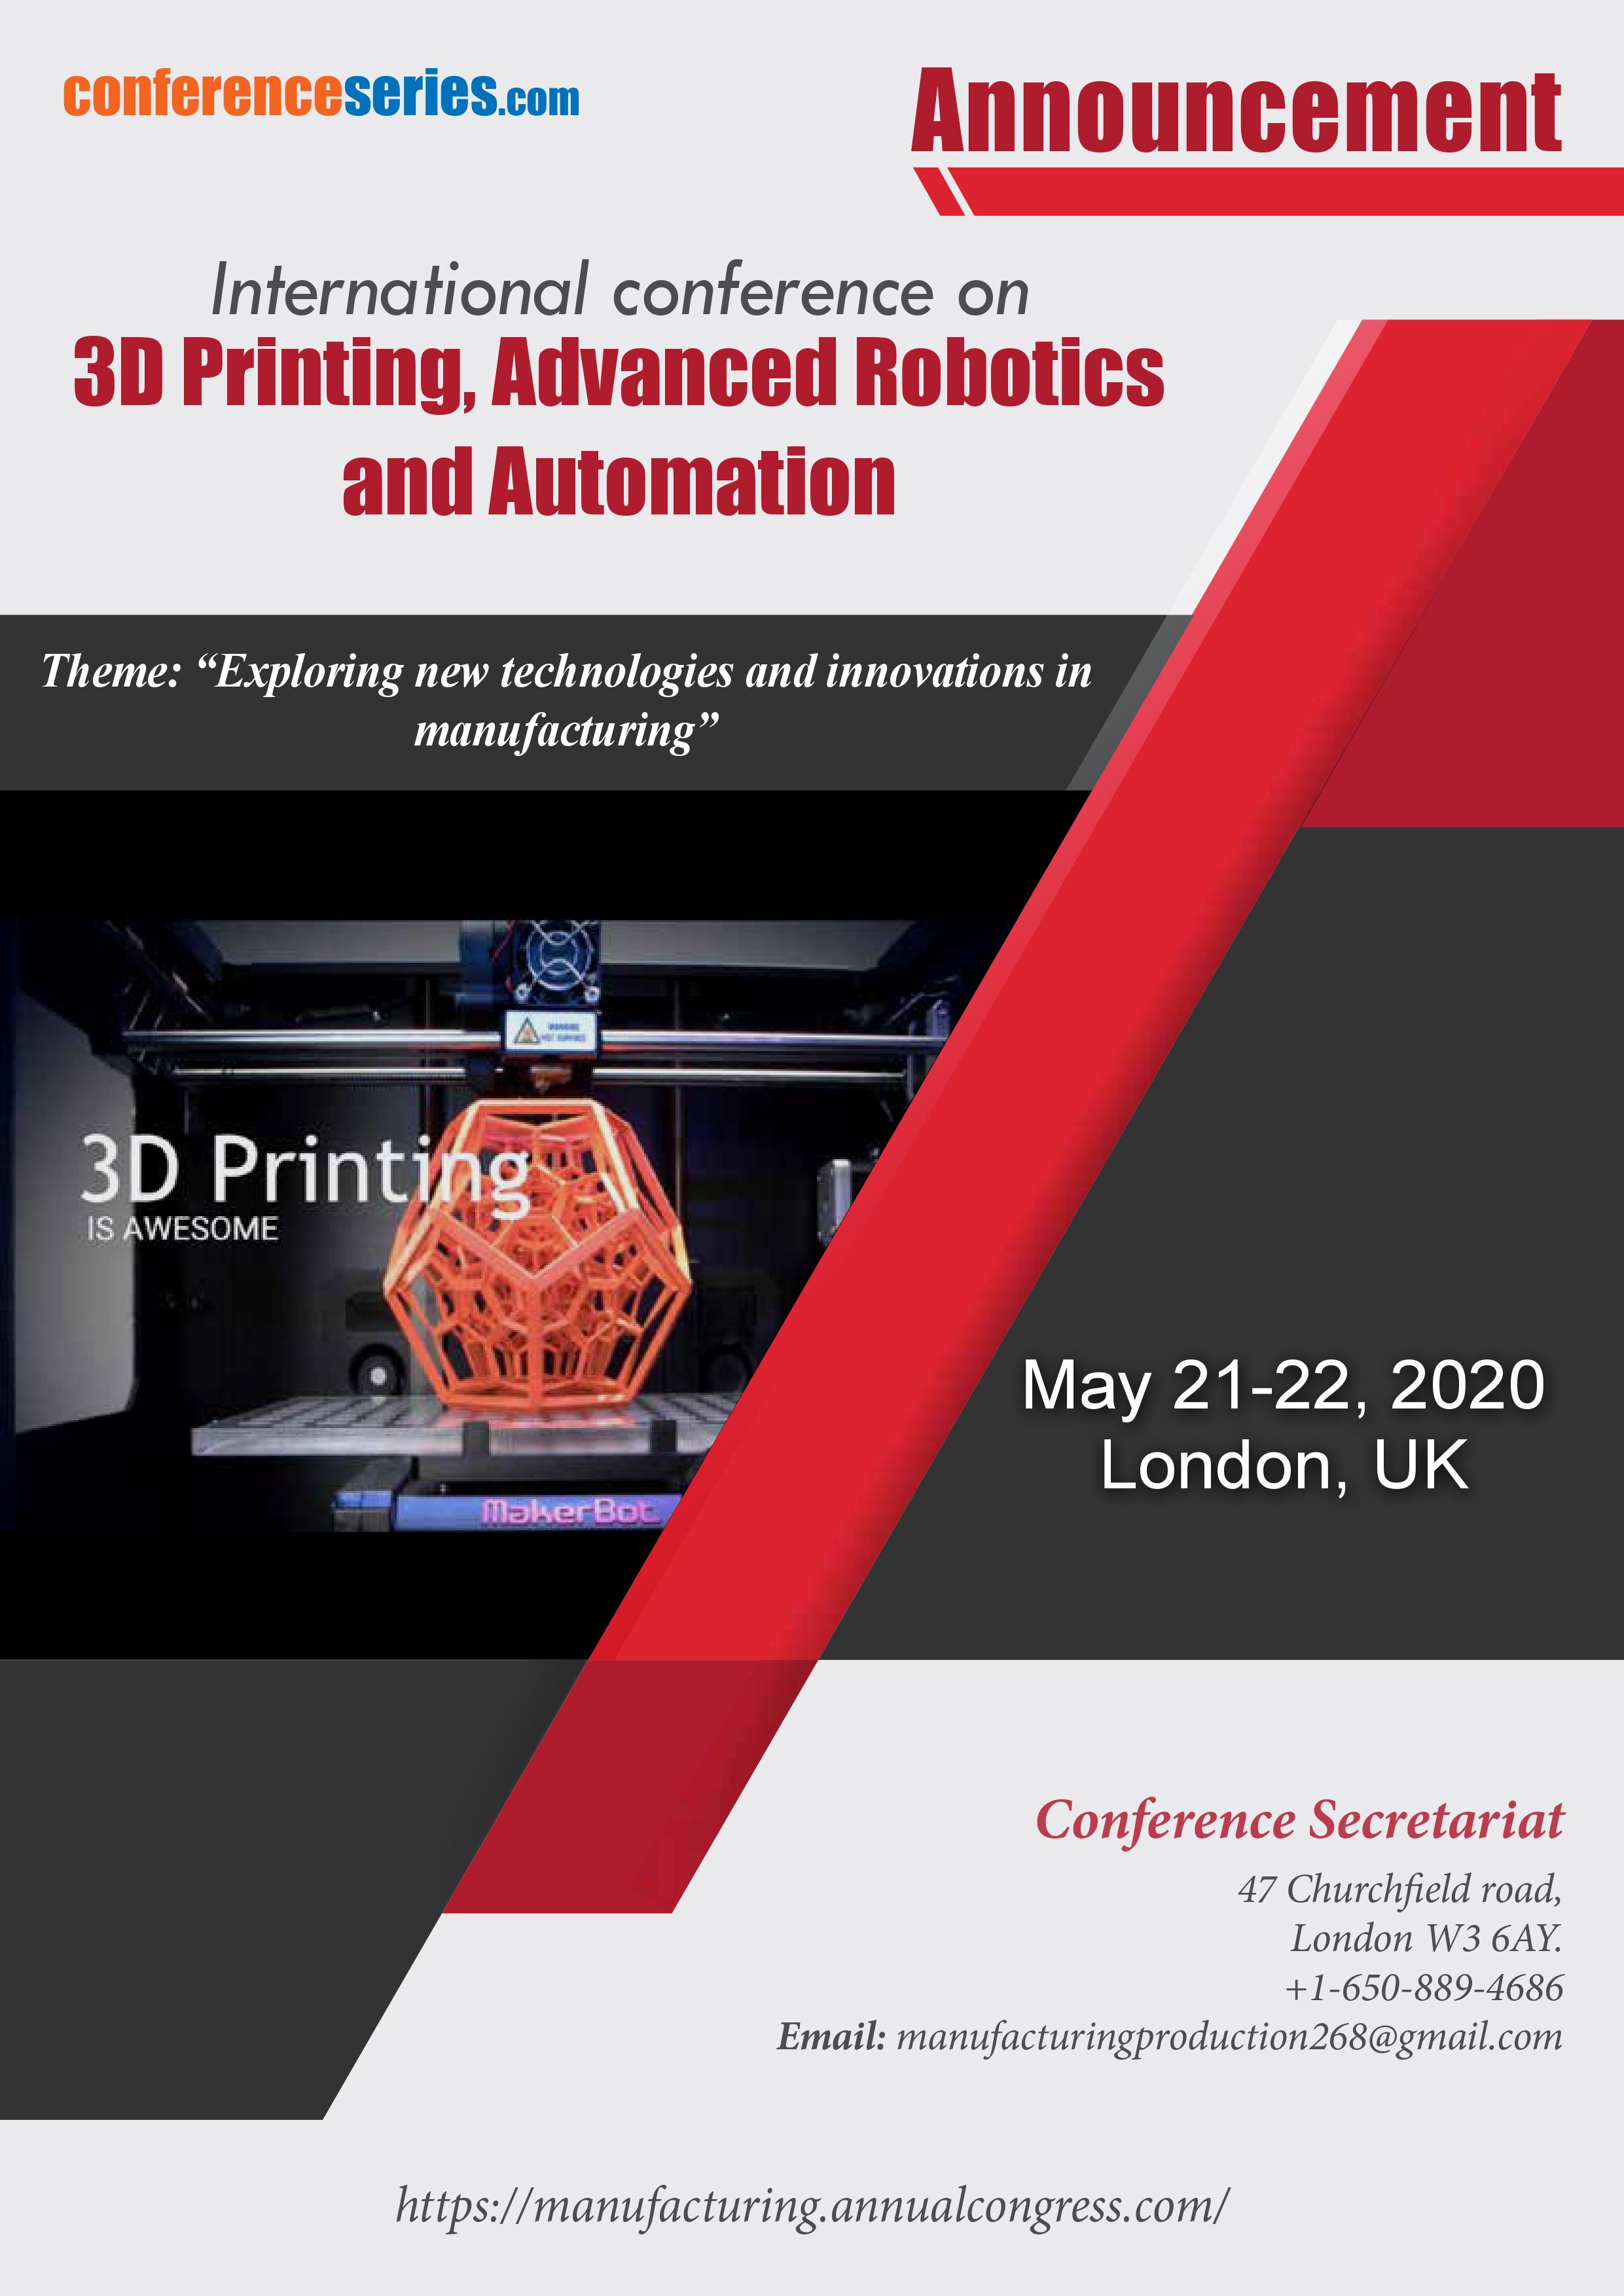 International Conference on 3d Printing, Advanced Robotics and Automation